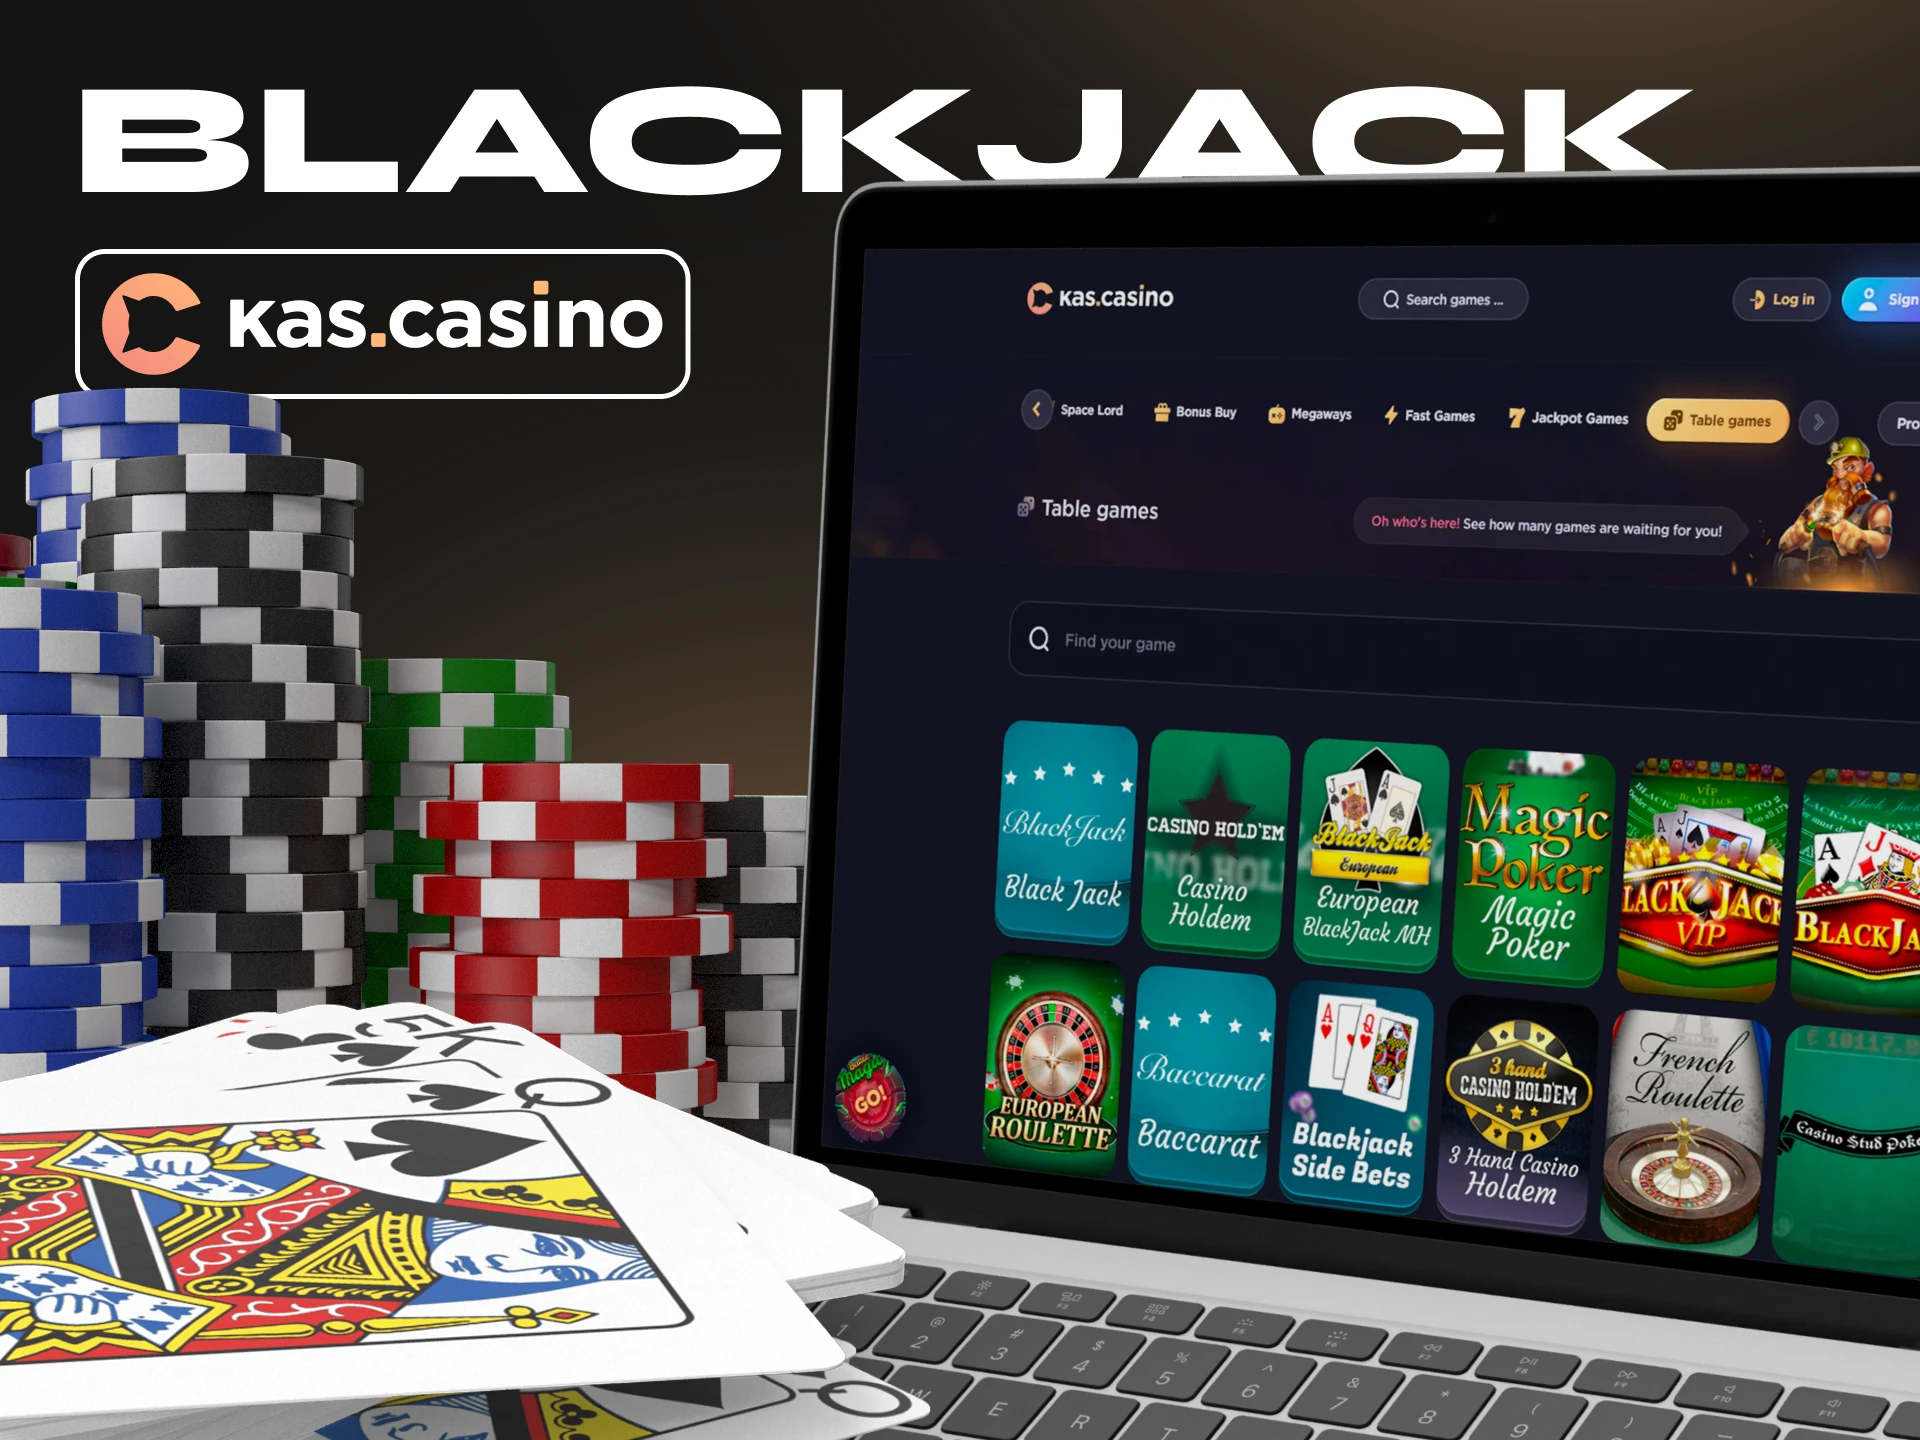 Play one of the most popular casino games, Blackjack, at Kas Casino.